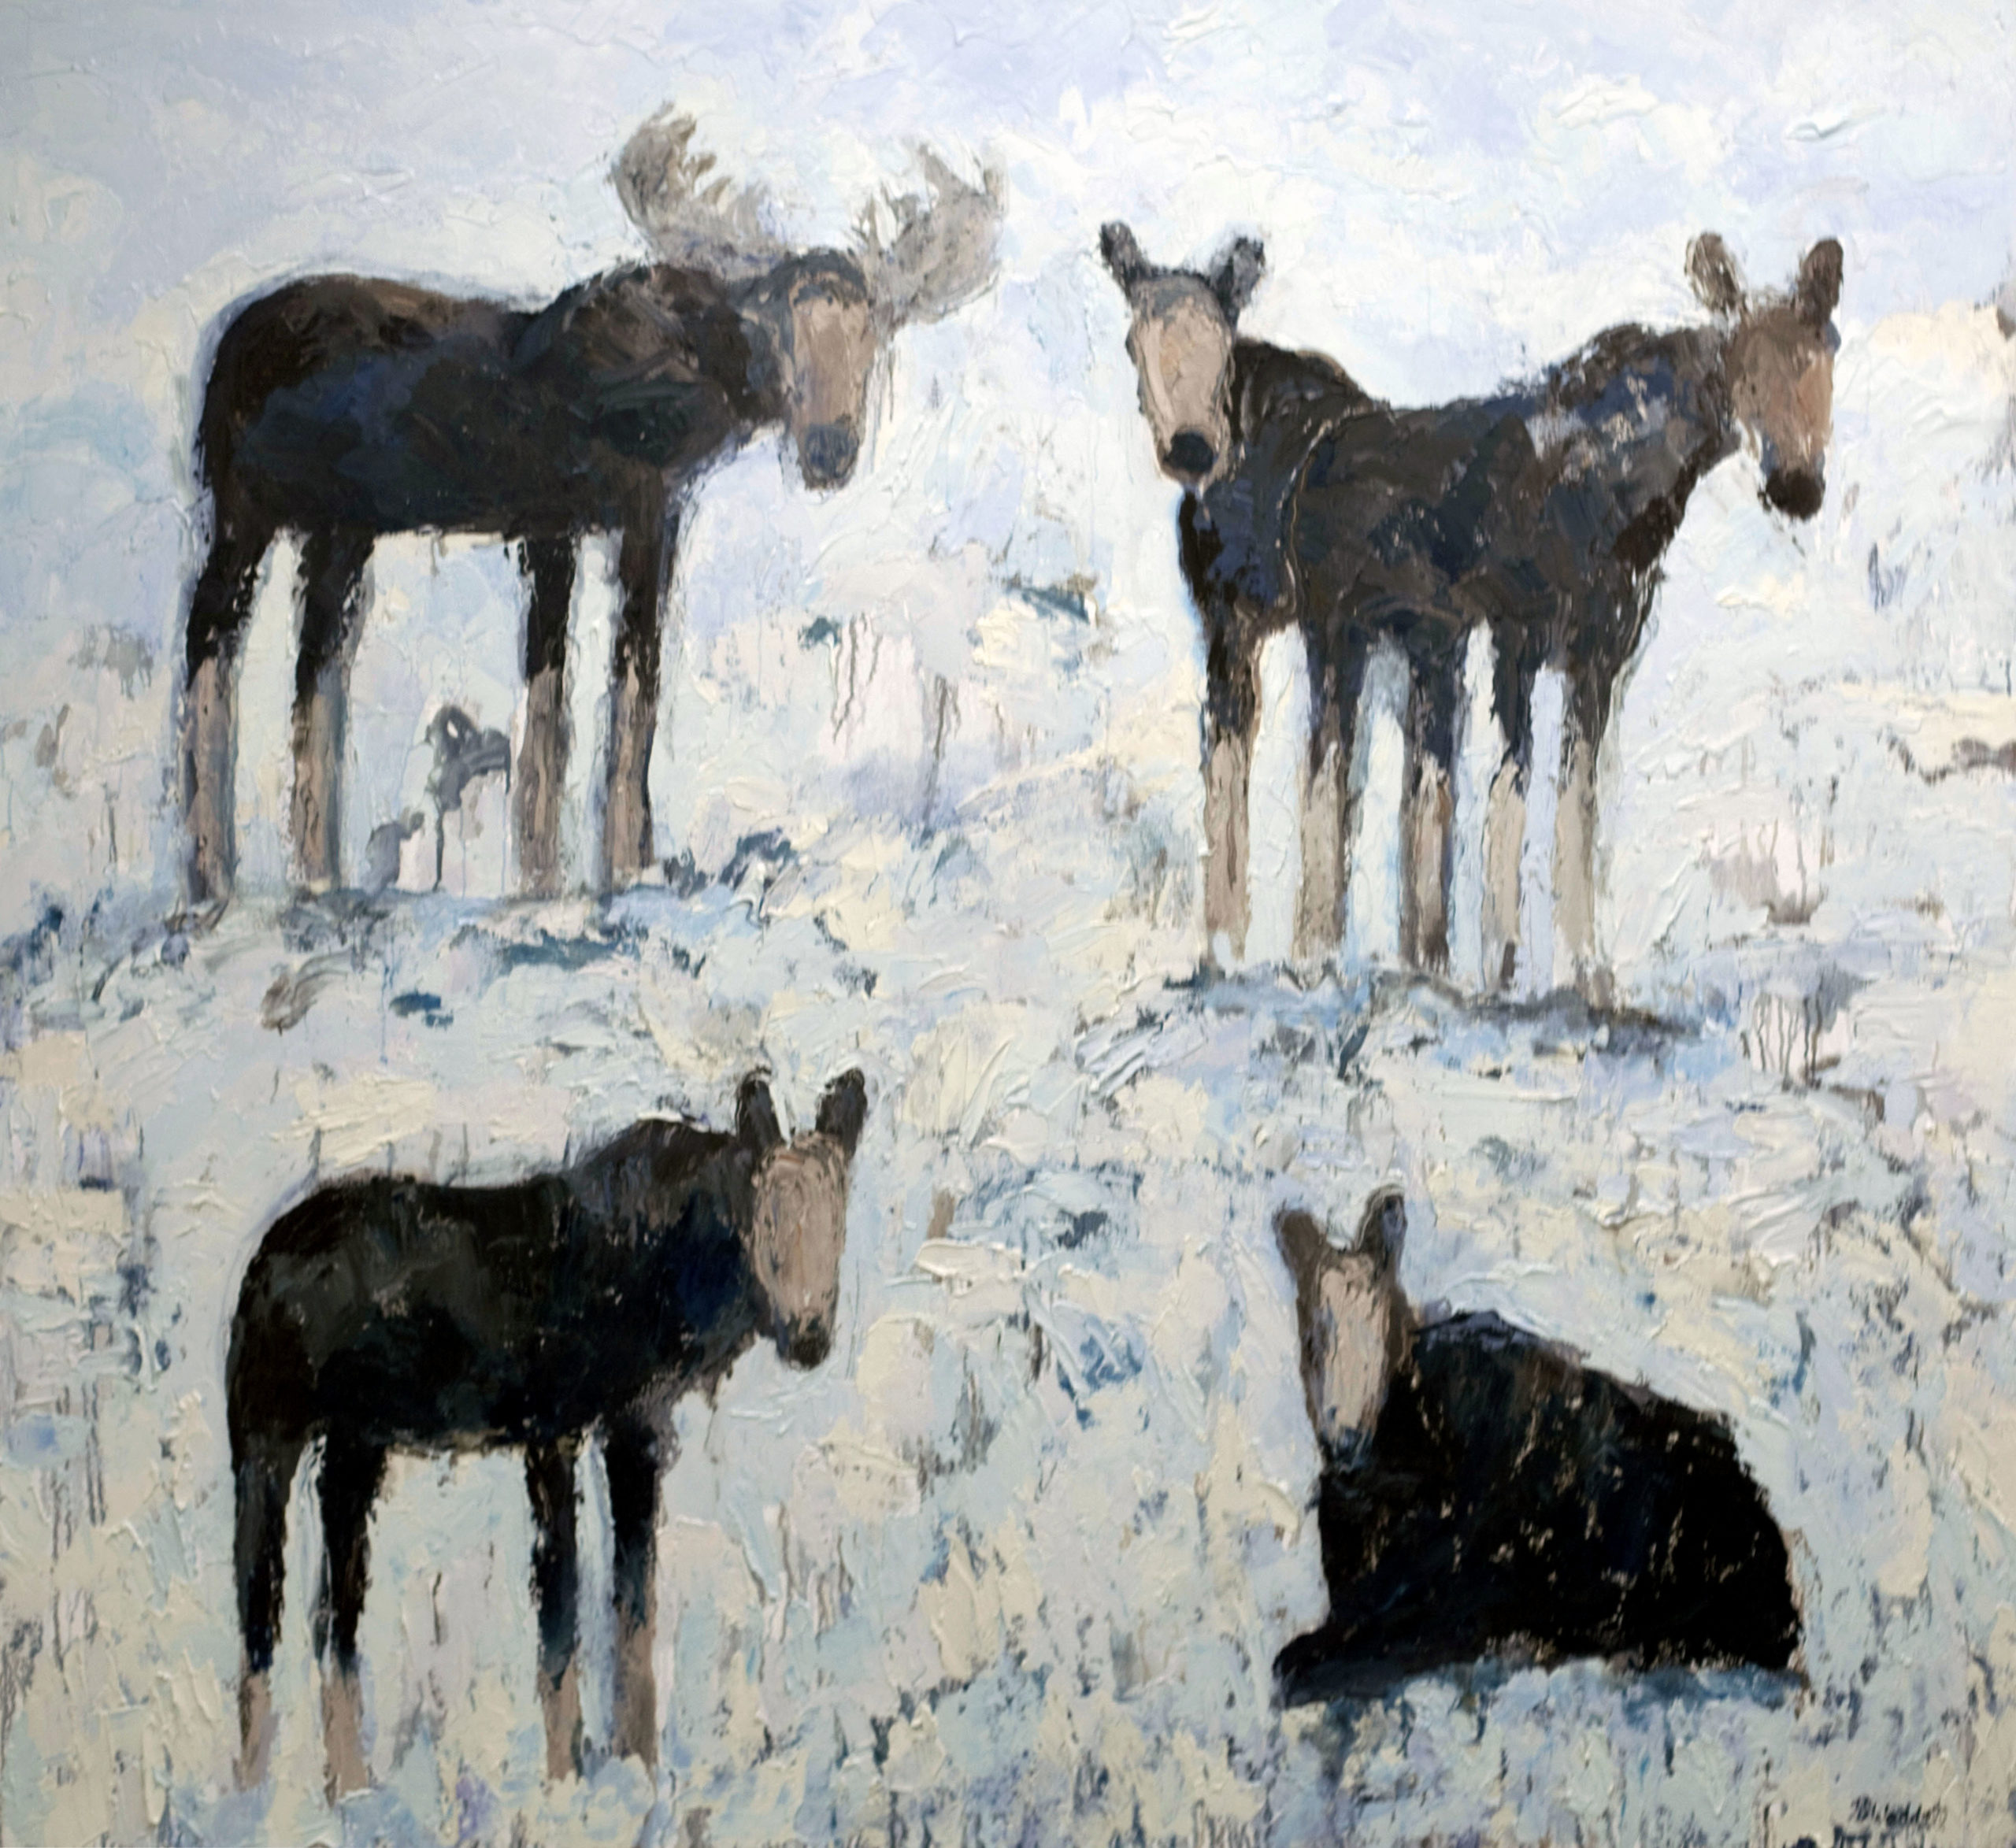 

											Theodore Waddell</b>

											<em>
												Theodore Waddell</em> 

											<h4>
												December 4 - February 13, 2020											</h4>

		                																																<i>Cottonwood Moose,</i>  
																																																					oil and encaustic on canvas, 
																																								60 x 60 inches 
																								
		                				